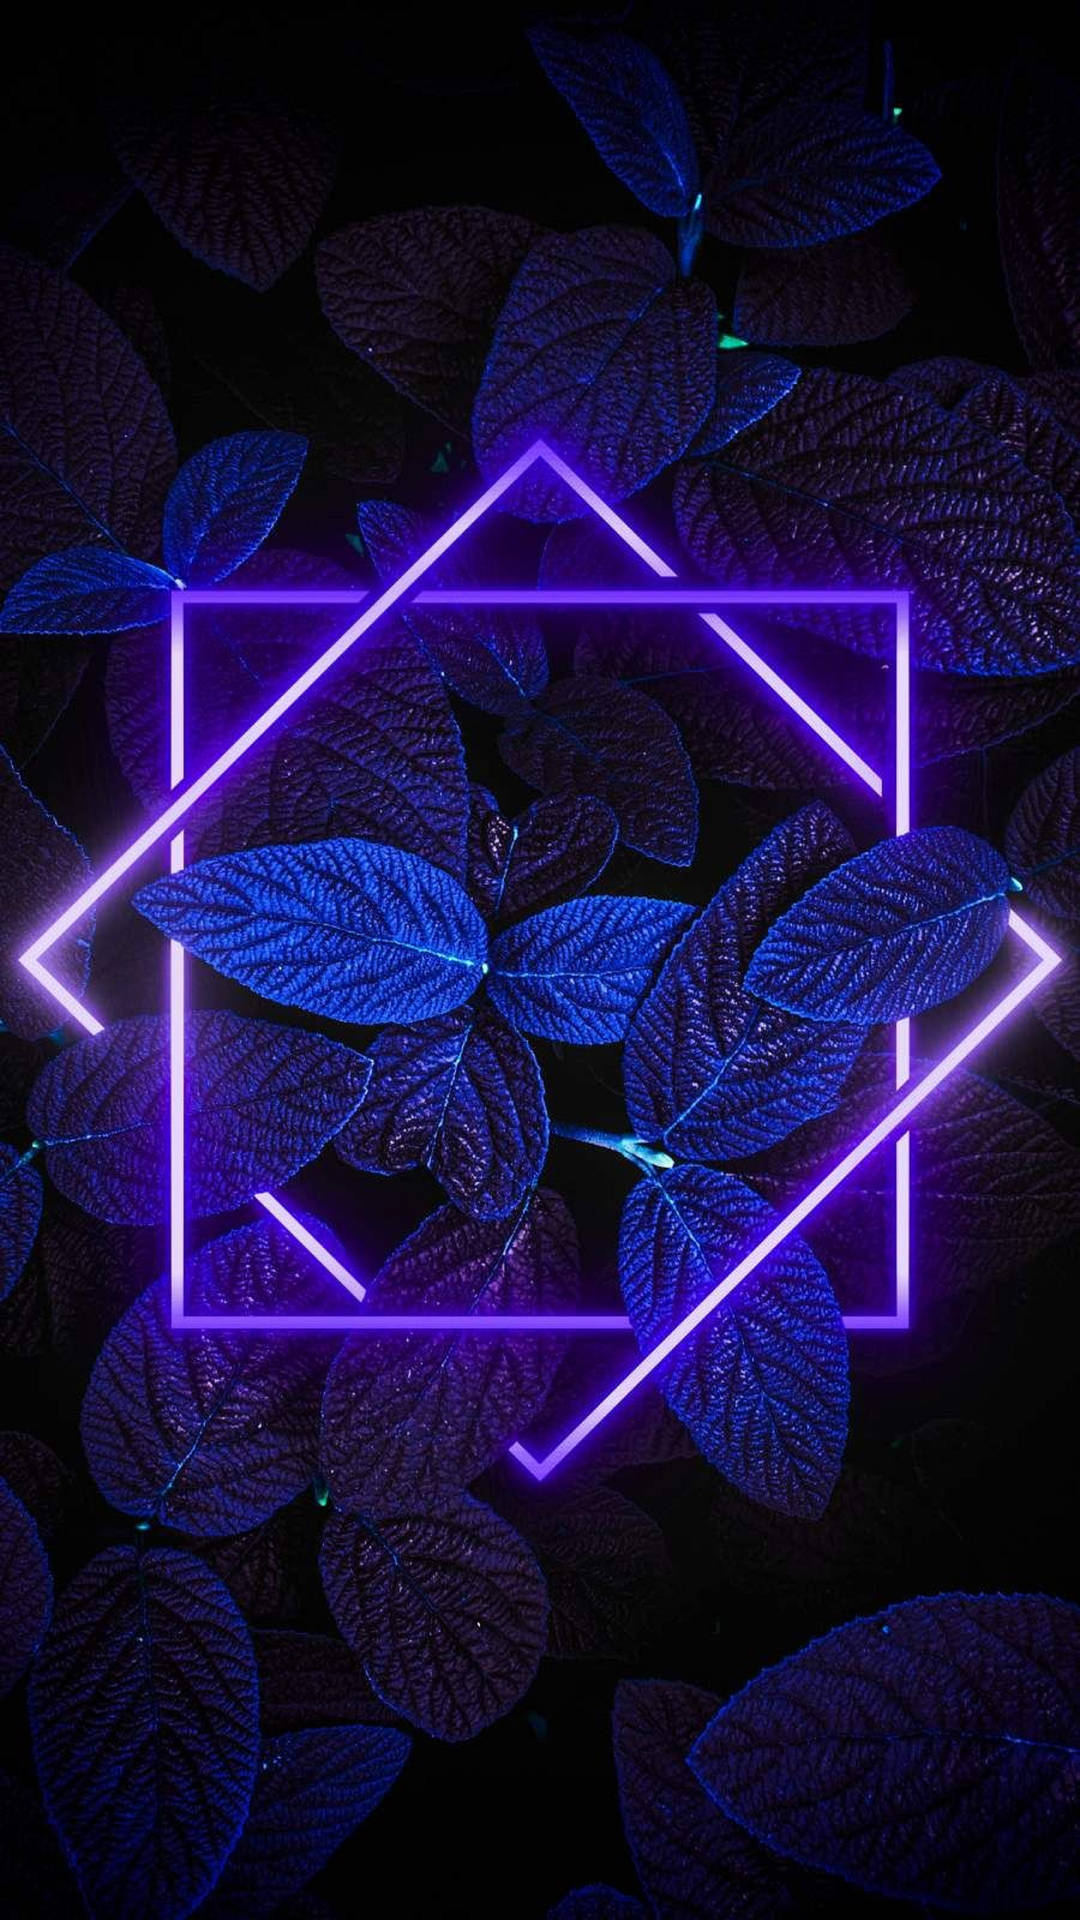 4k Neon Iphone Leaves With Lights Wallpaper